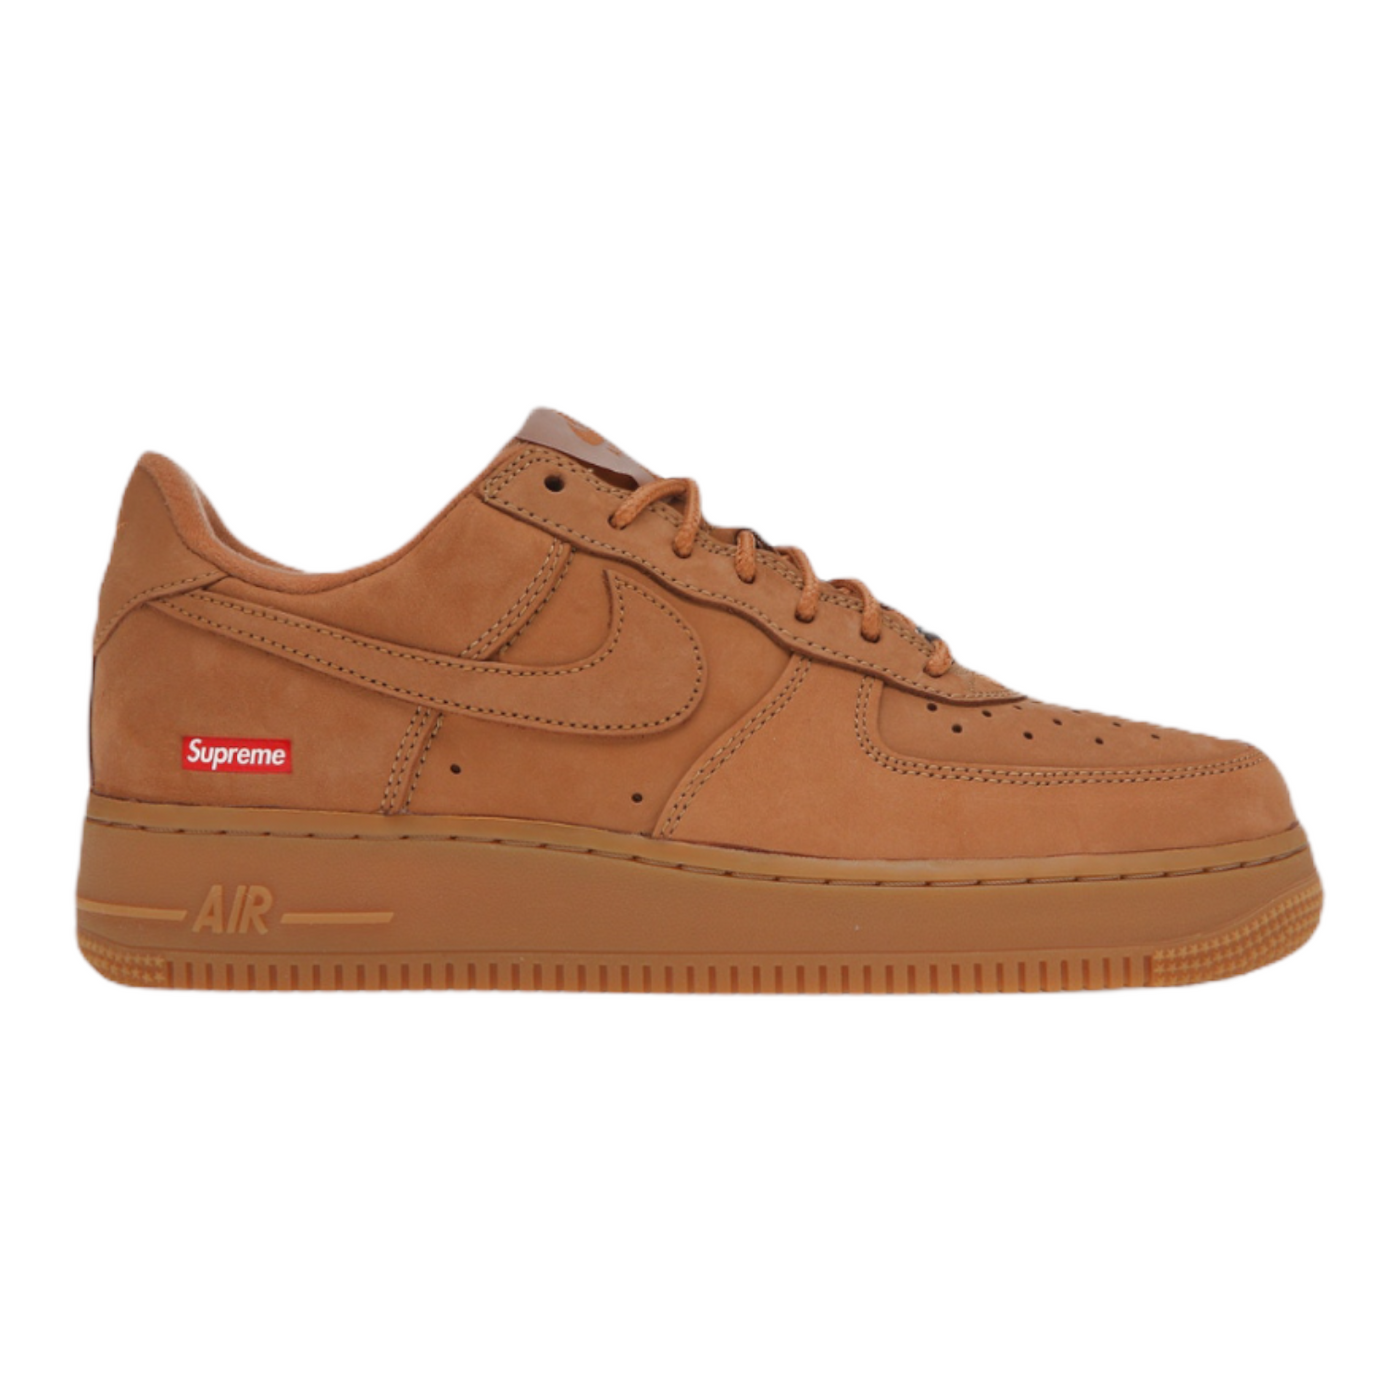 NIKE AIR FORCE 1 LOW SP SUPREME WHEAT